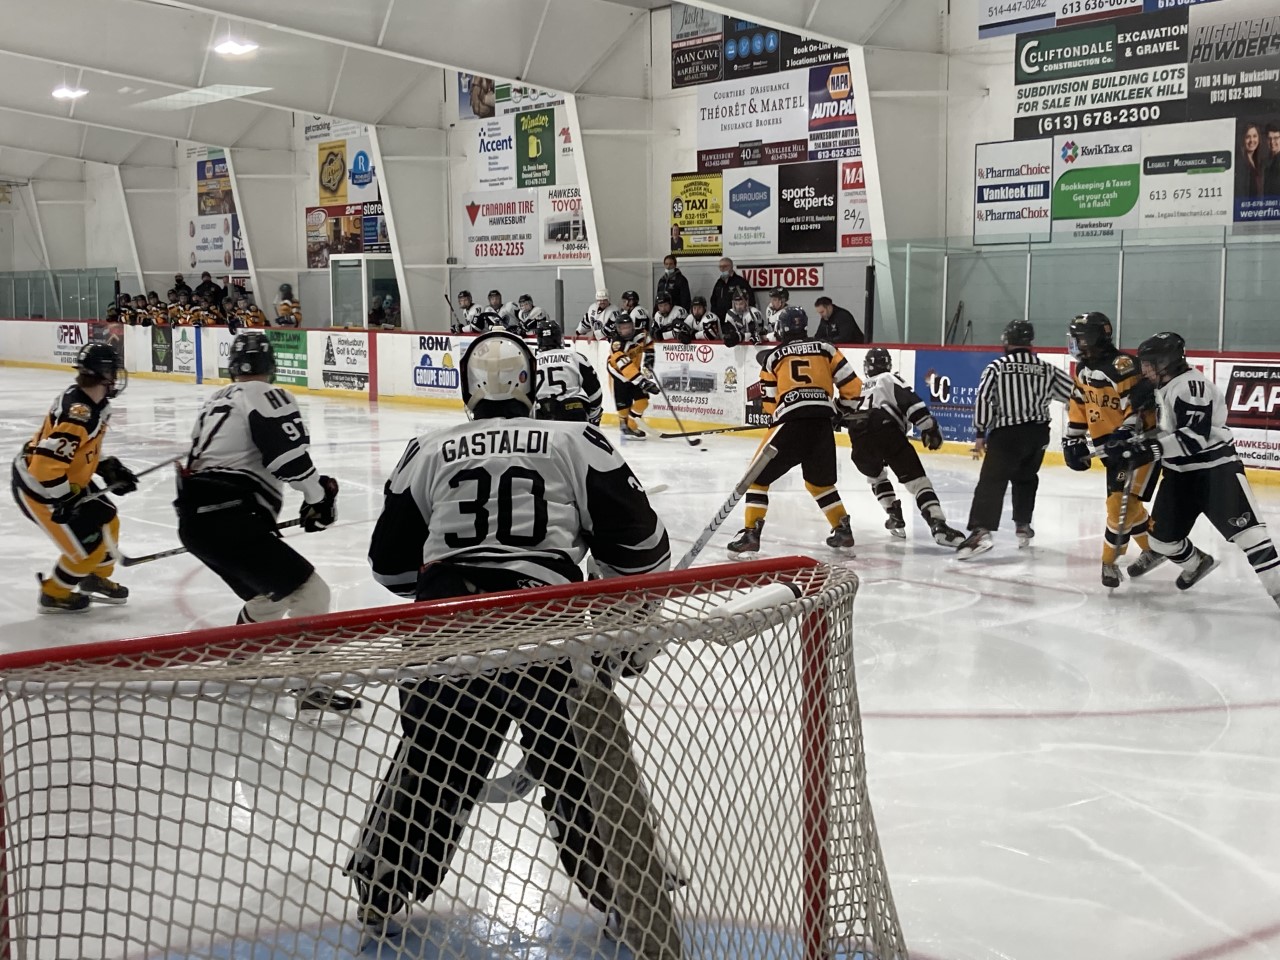 Cougars-Volant series tied 2-2